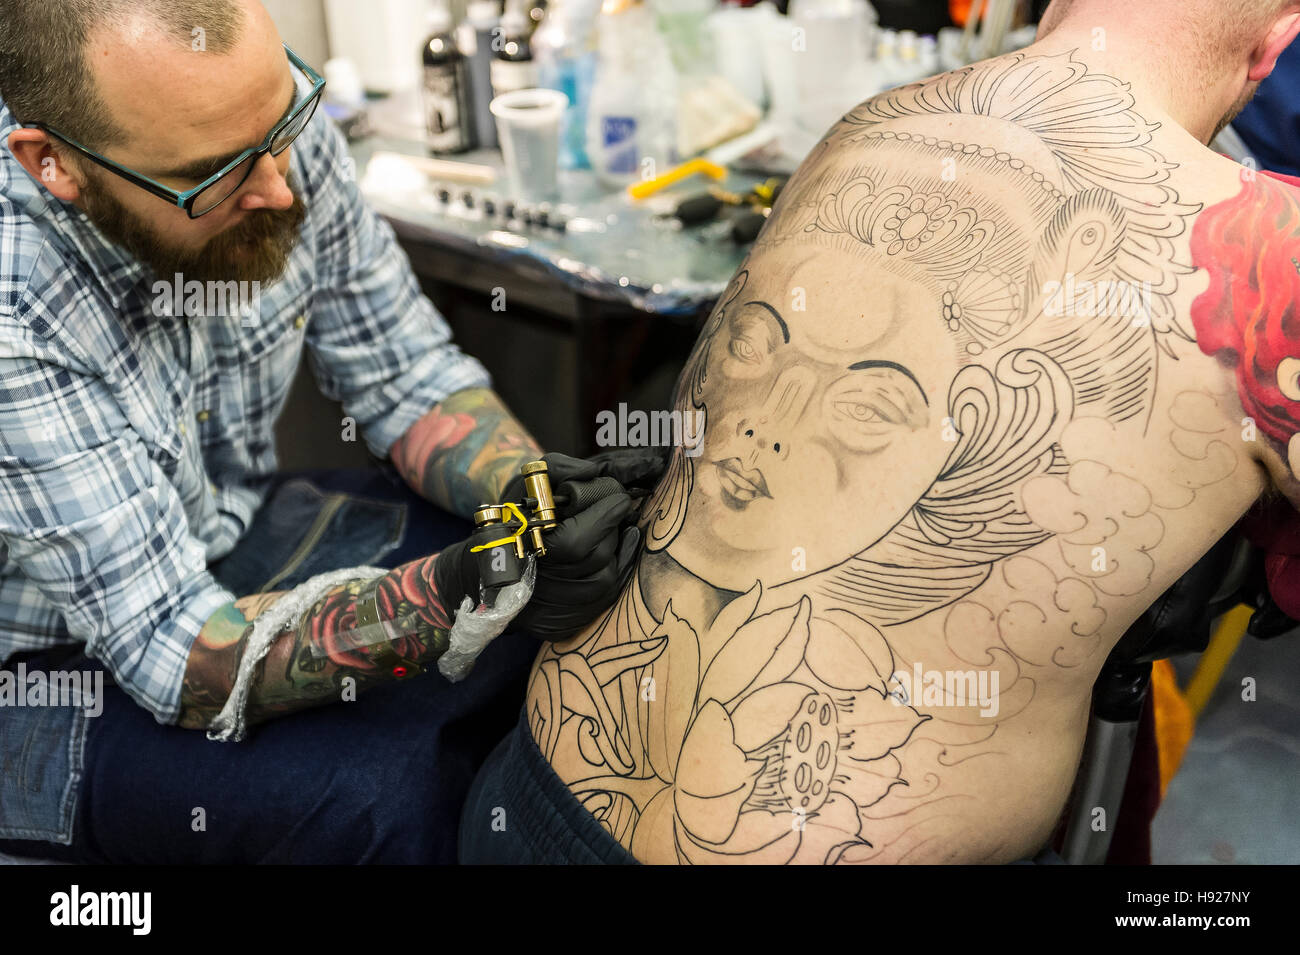 A tattooist inking a large design on the back of a customer. Stock Photo